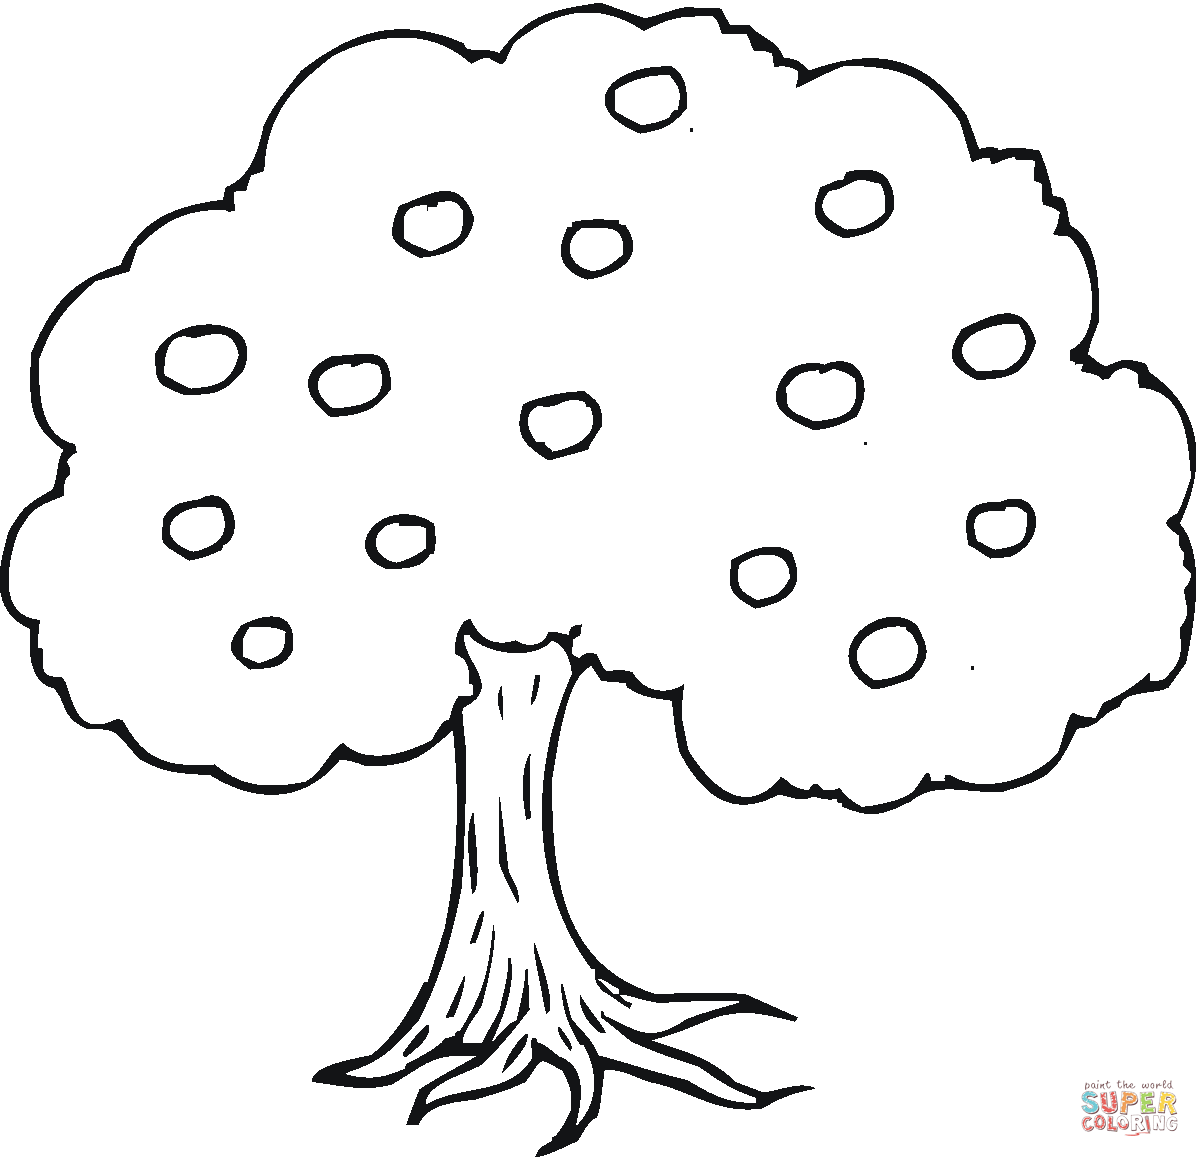 Apple Tree Coloring Page   Coloring Pages For Kids And For Adults ...